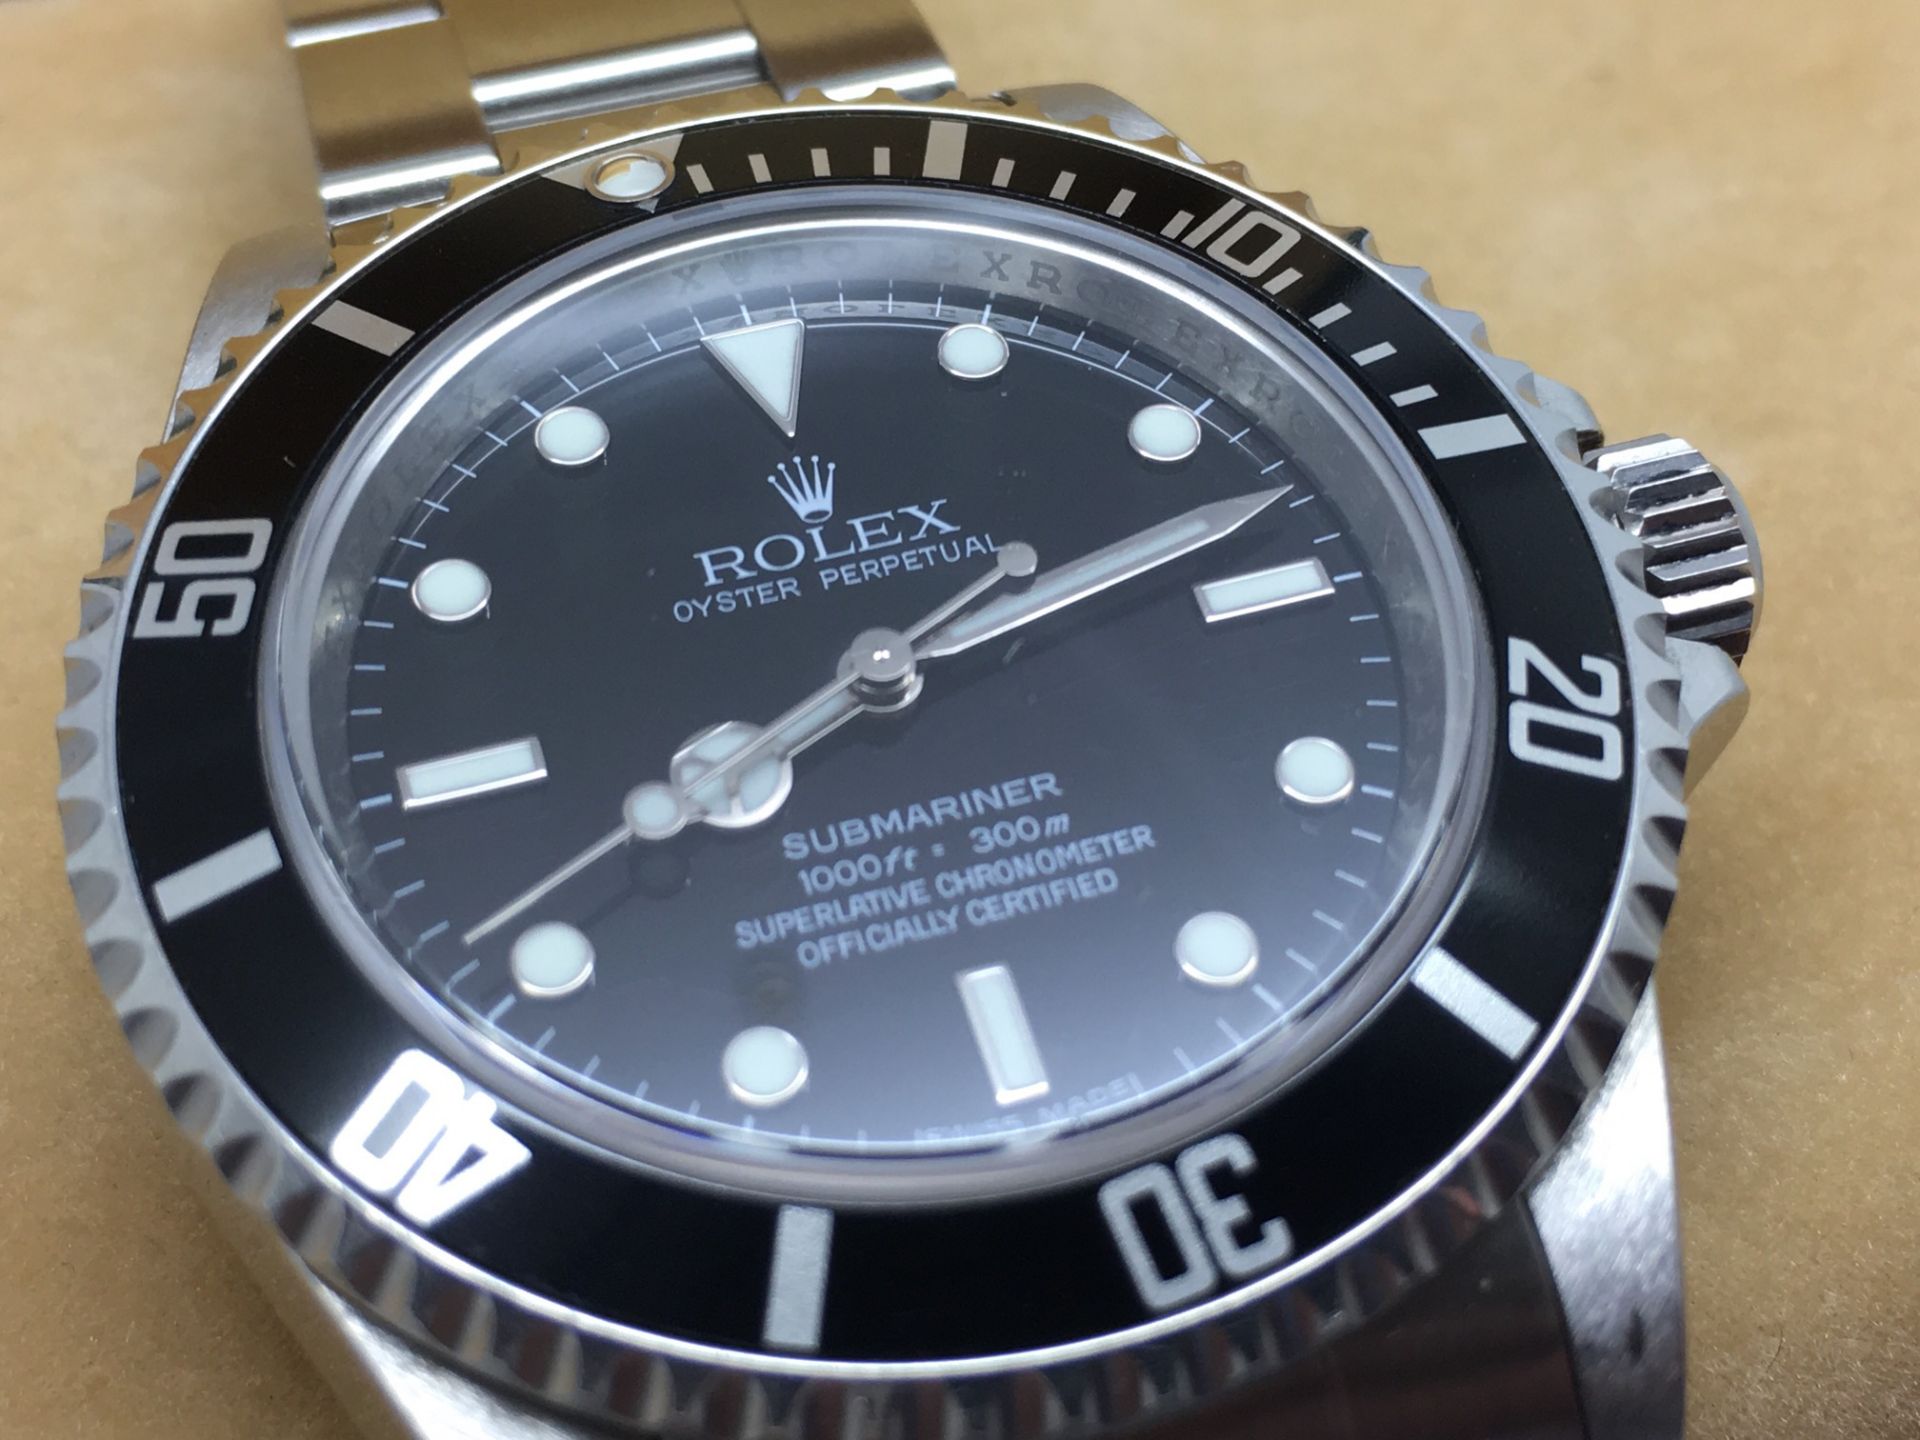 ROLEX OYSTER SUBMARINER WATCH - DATES TO APPROX 2008/09 - Image 10 of 10